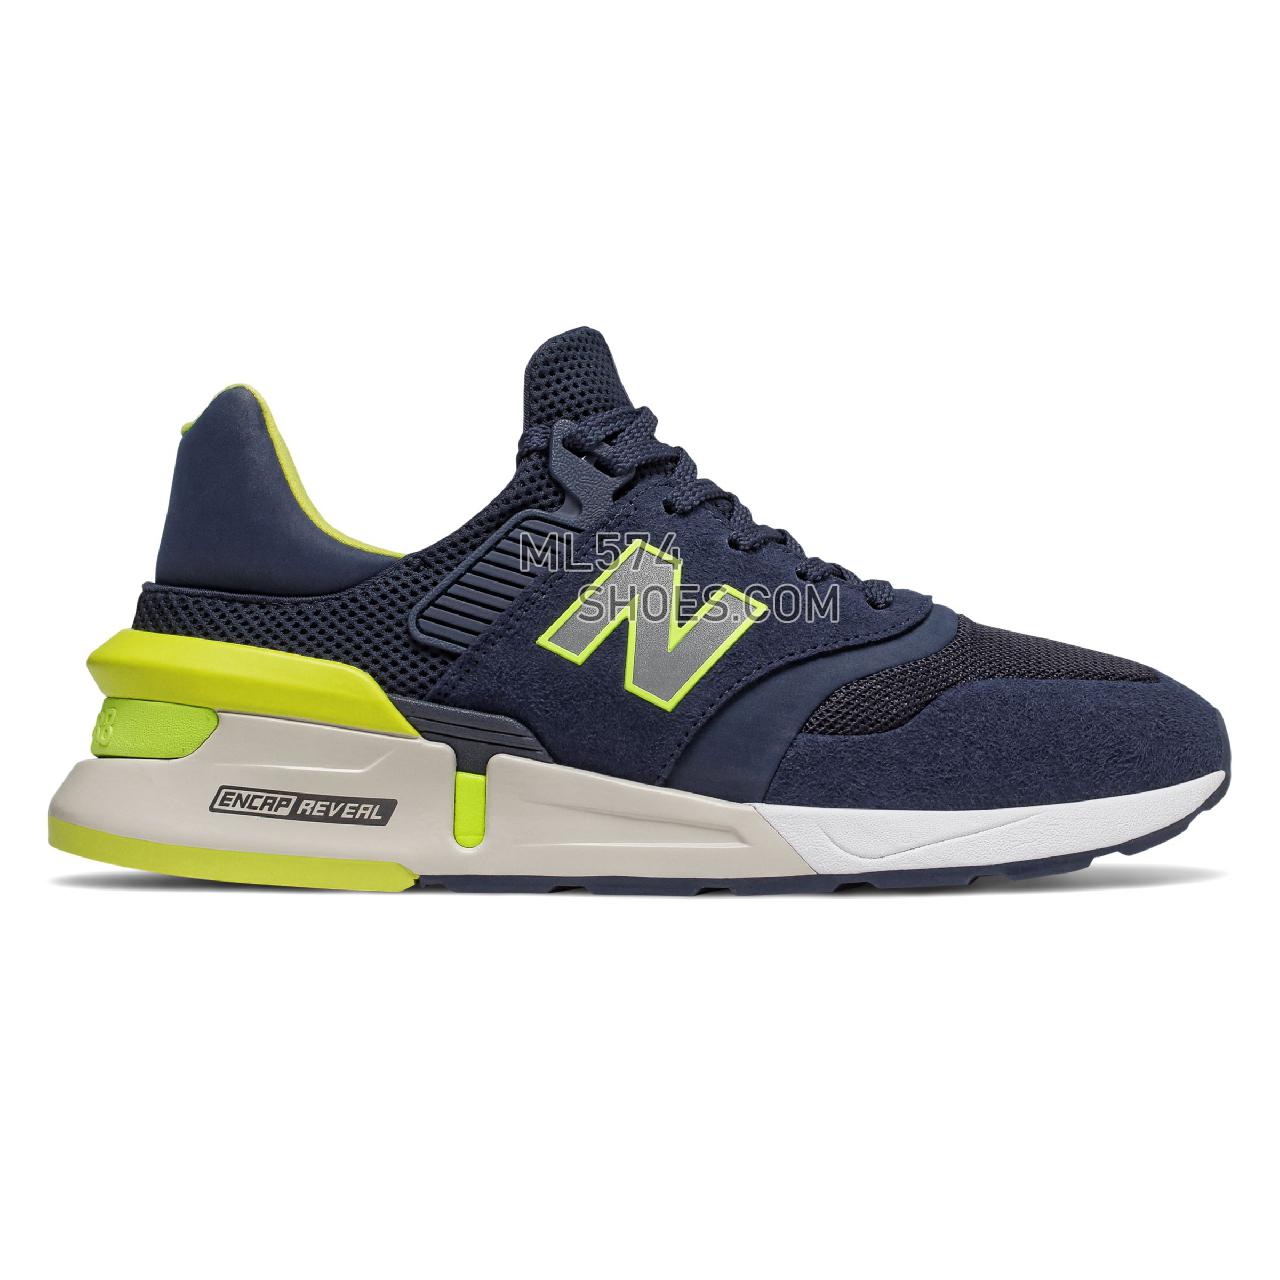 New Balance 997 Sport - Men's Sport Style Sneakers - Pigment with Sulphur Yellow - MS997RH